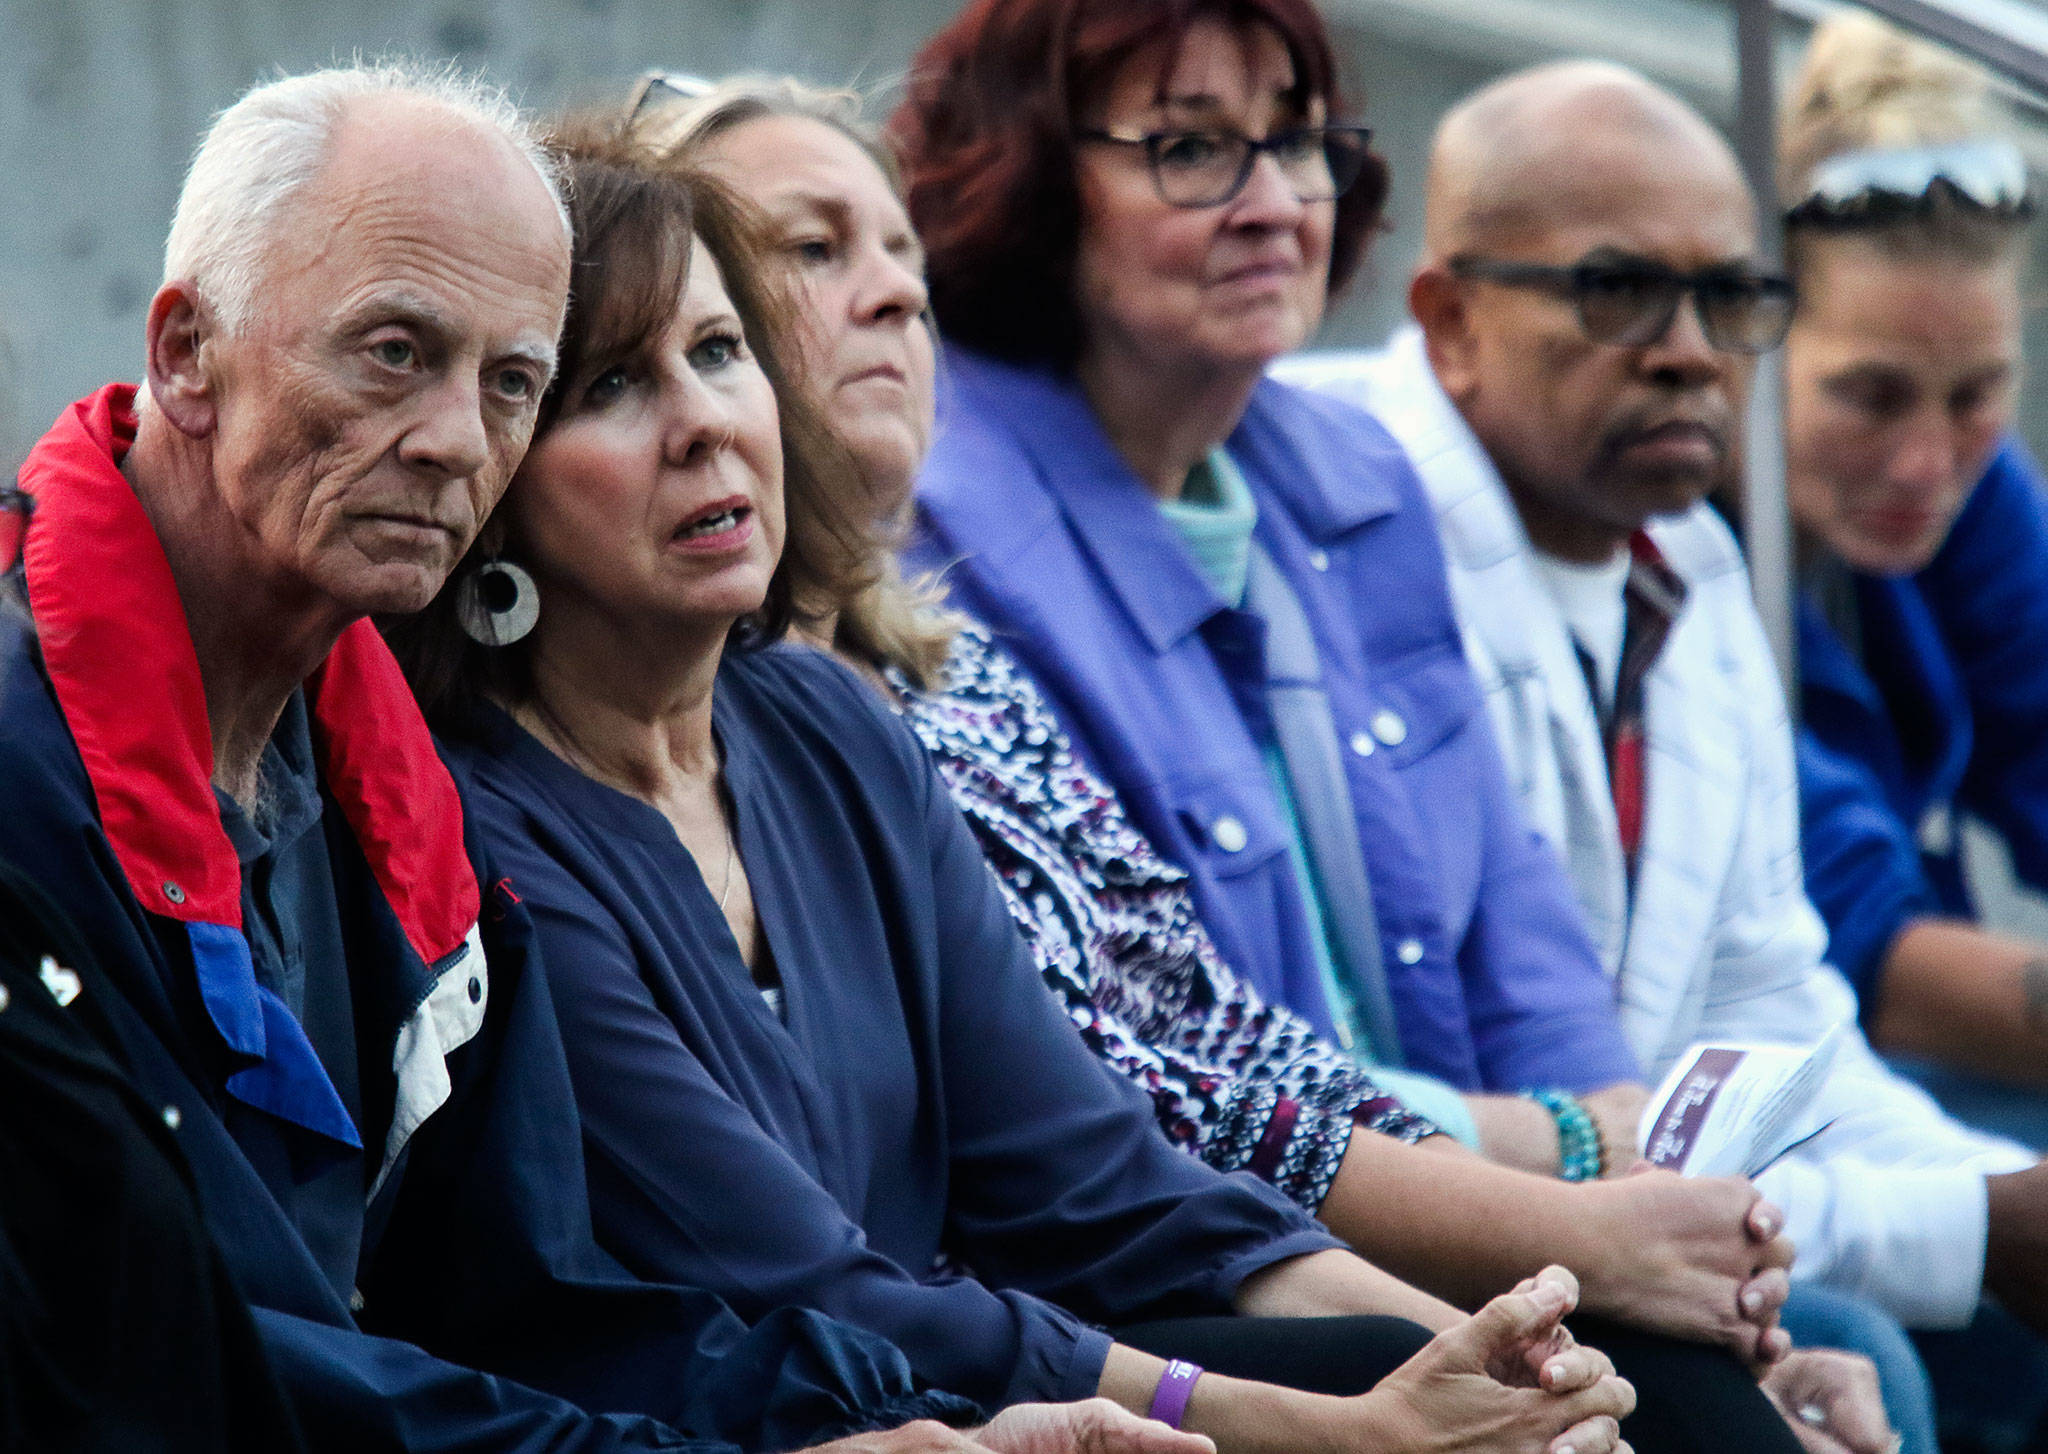 Mike and Debbie Warfield (left), who lost their 24-year-old son Spencer to a heroin overdose, listen with others to speakers at “A Night to Remember, A Time to Act.” The event, Thursday night at the courhouse plaza, drew attention to the opioid crisis. (Dan Bates / The Herald)